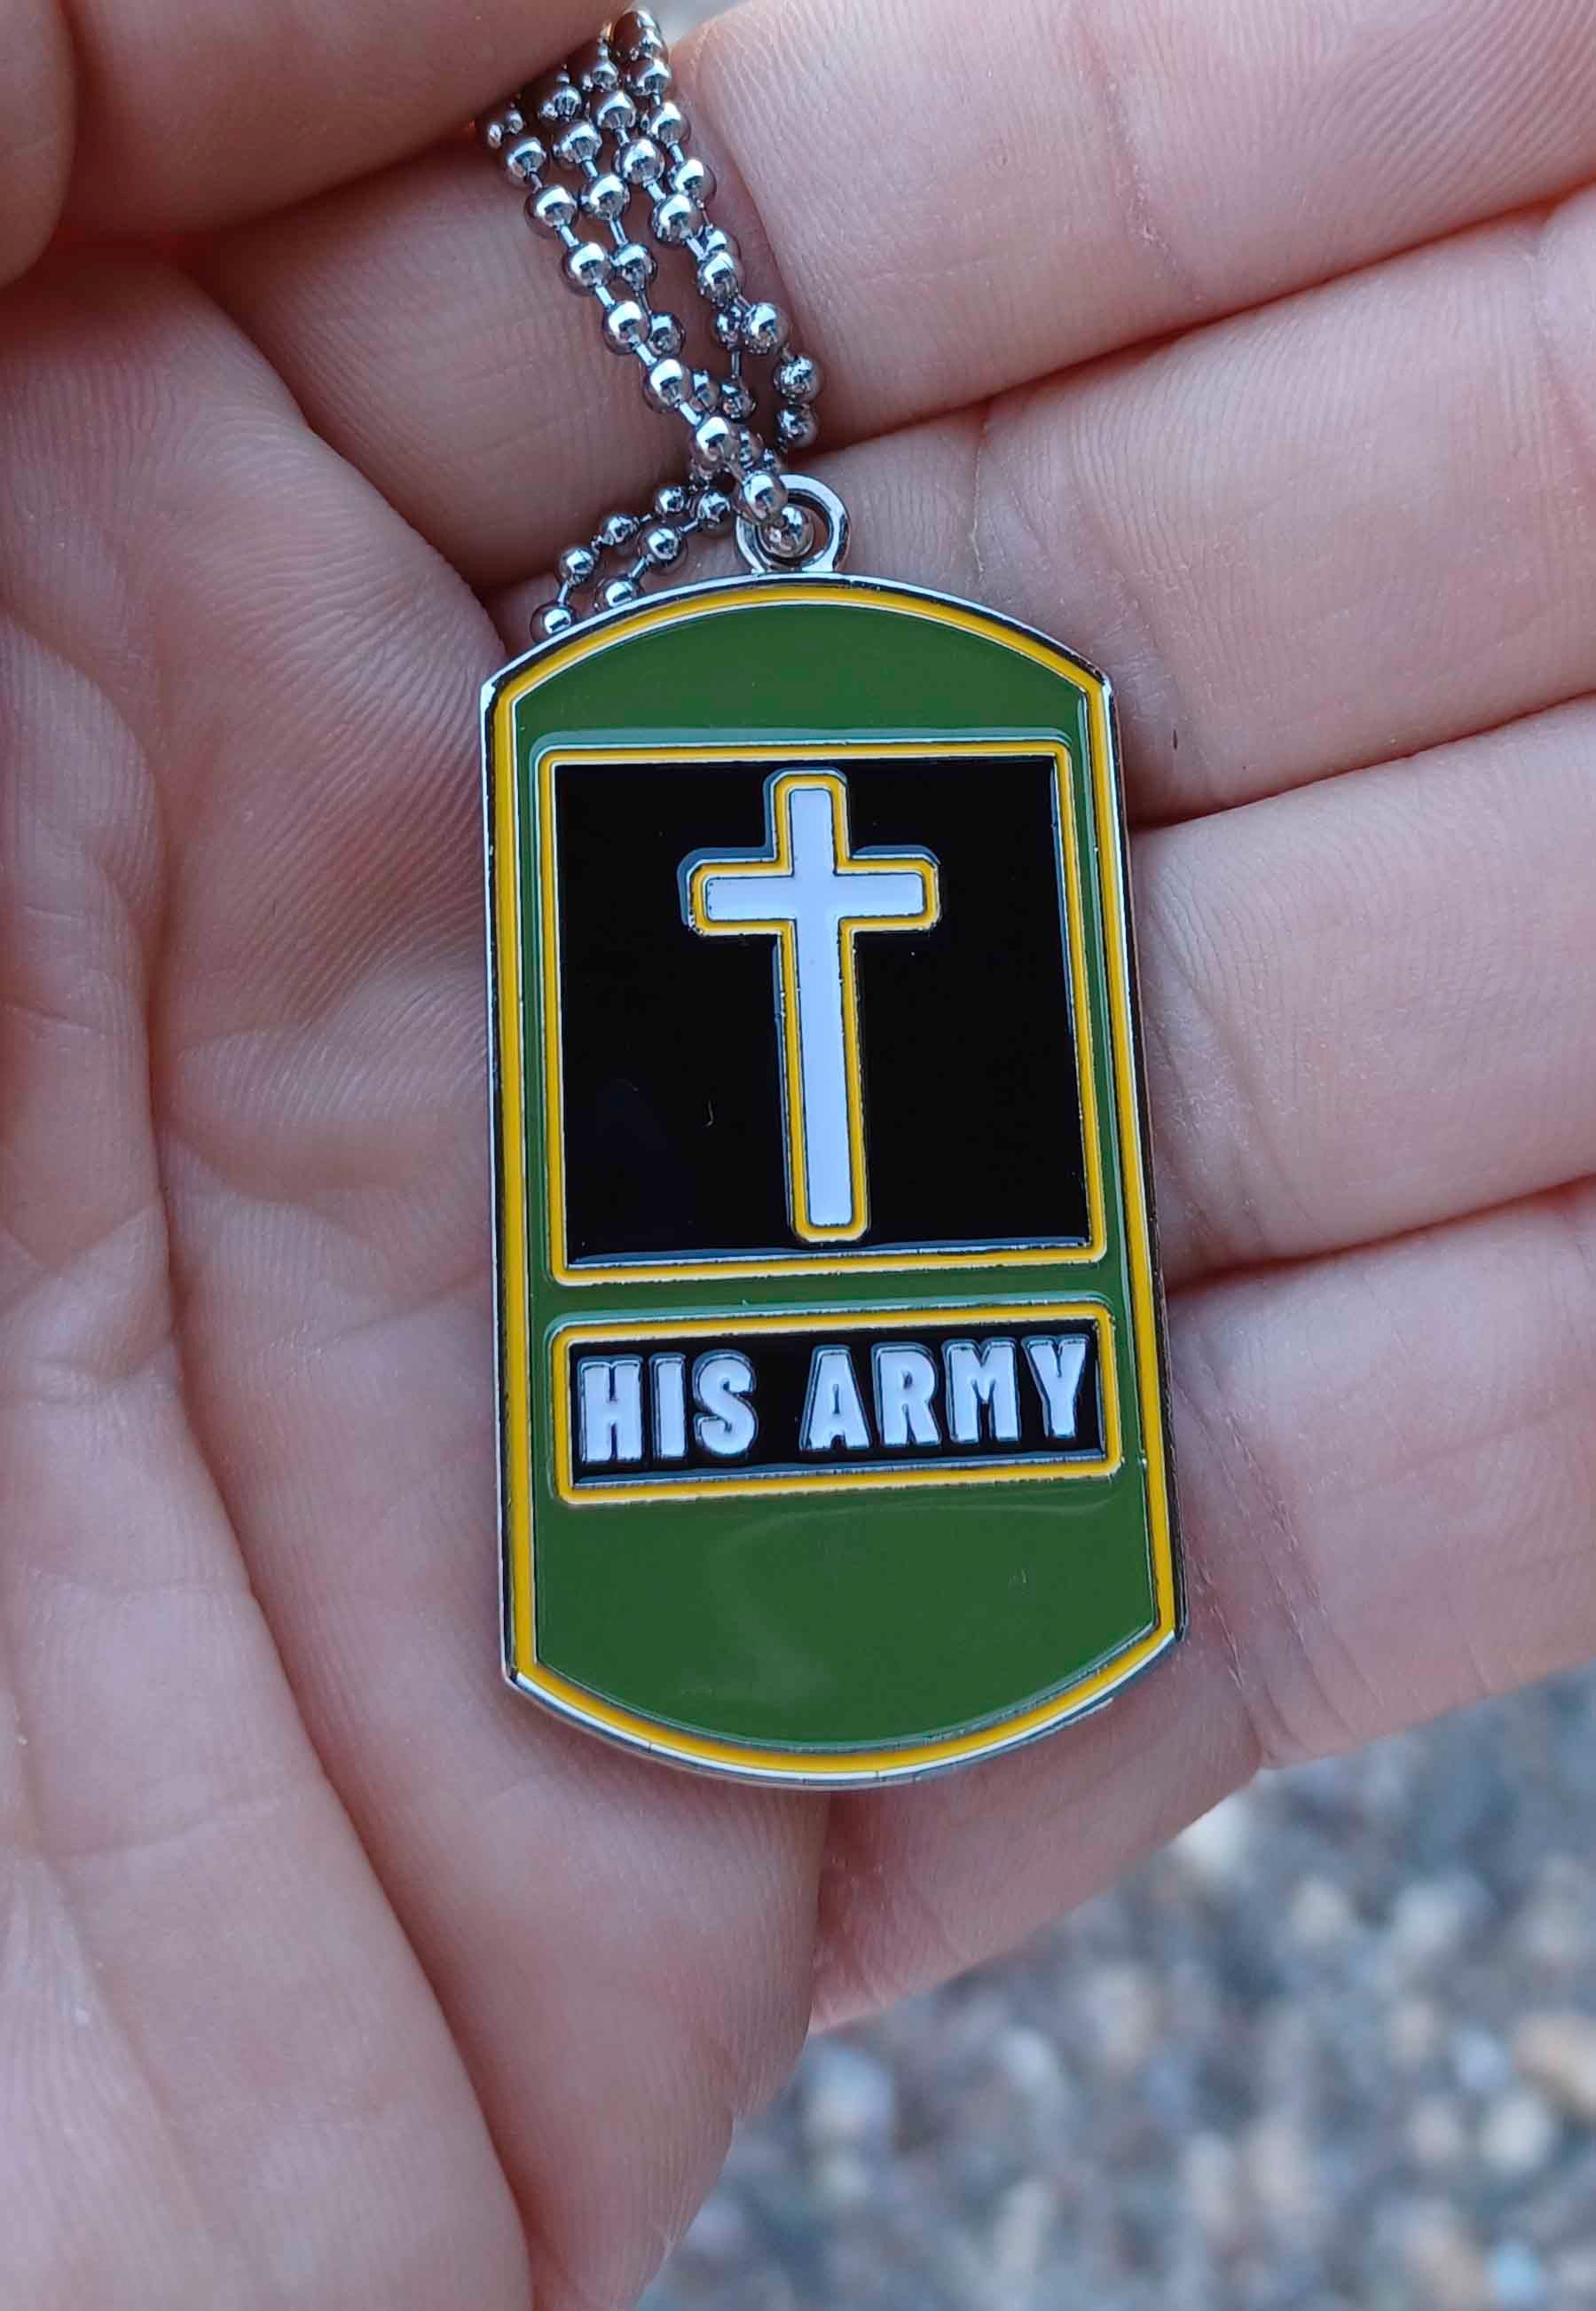 His Army Christian dog tag necklace